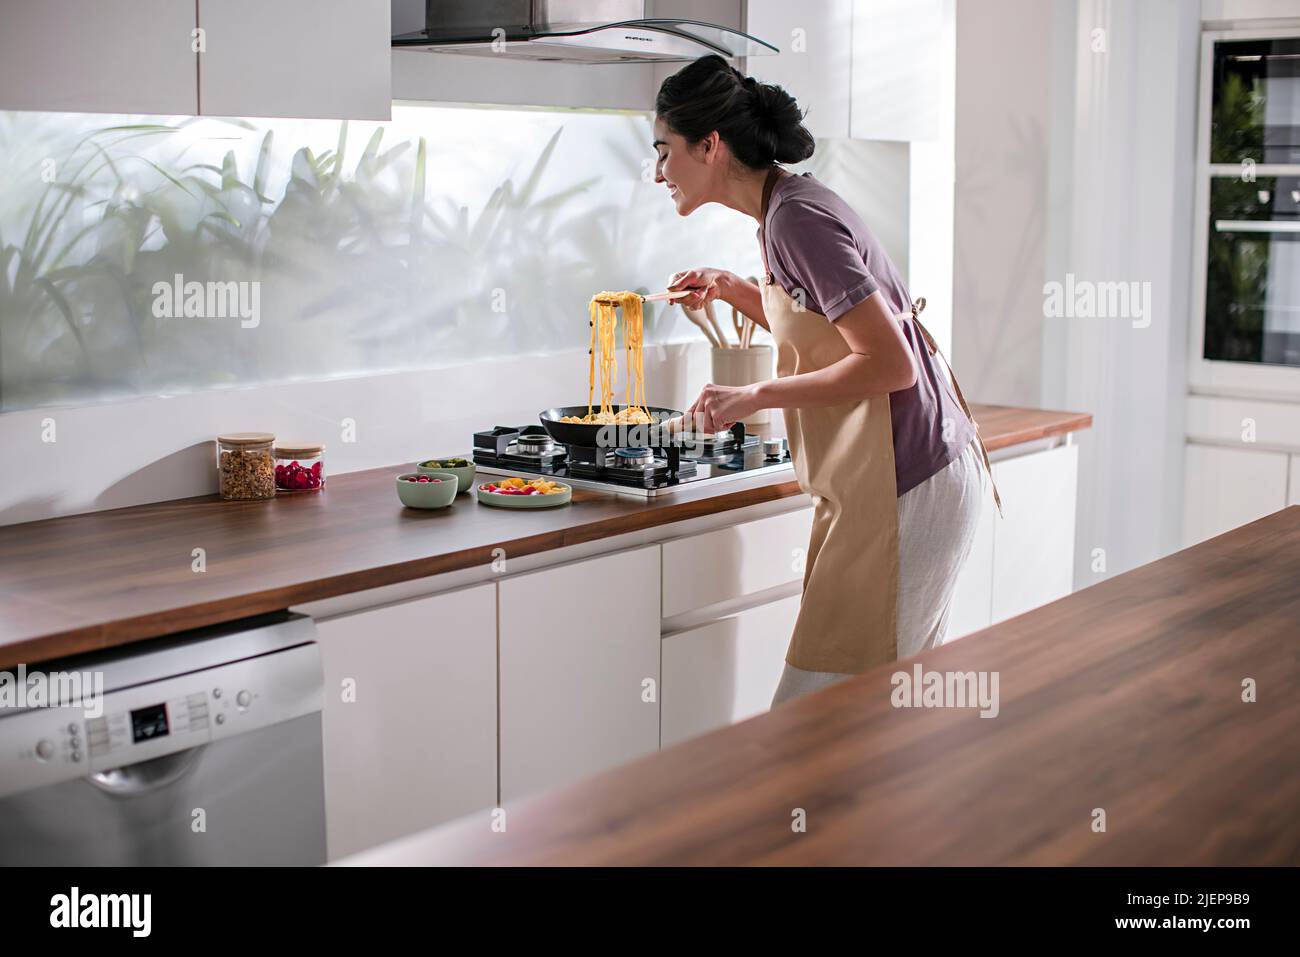 Side profile of a young woman cooking noodles in the kitchen Stock Photo